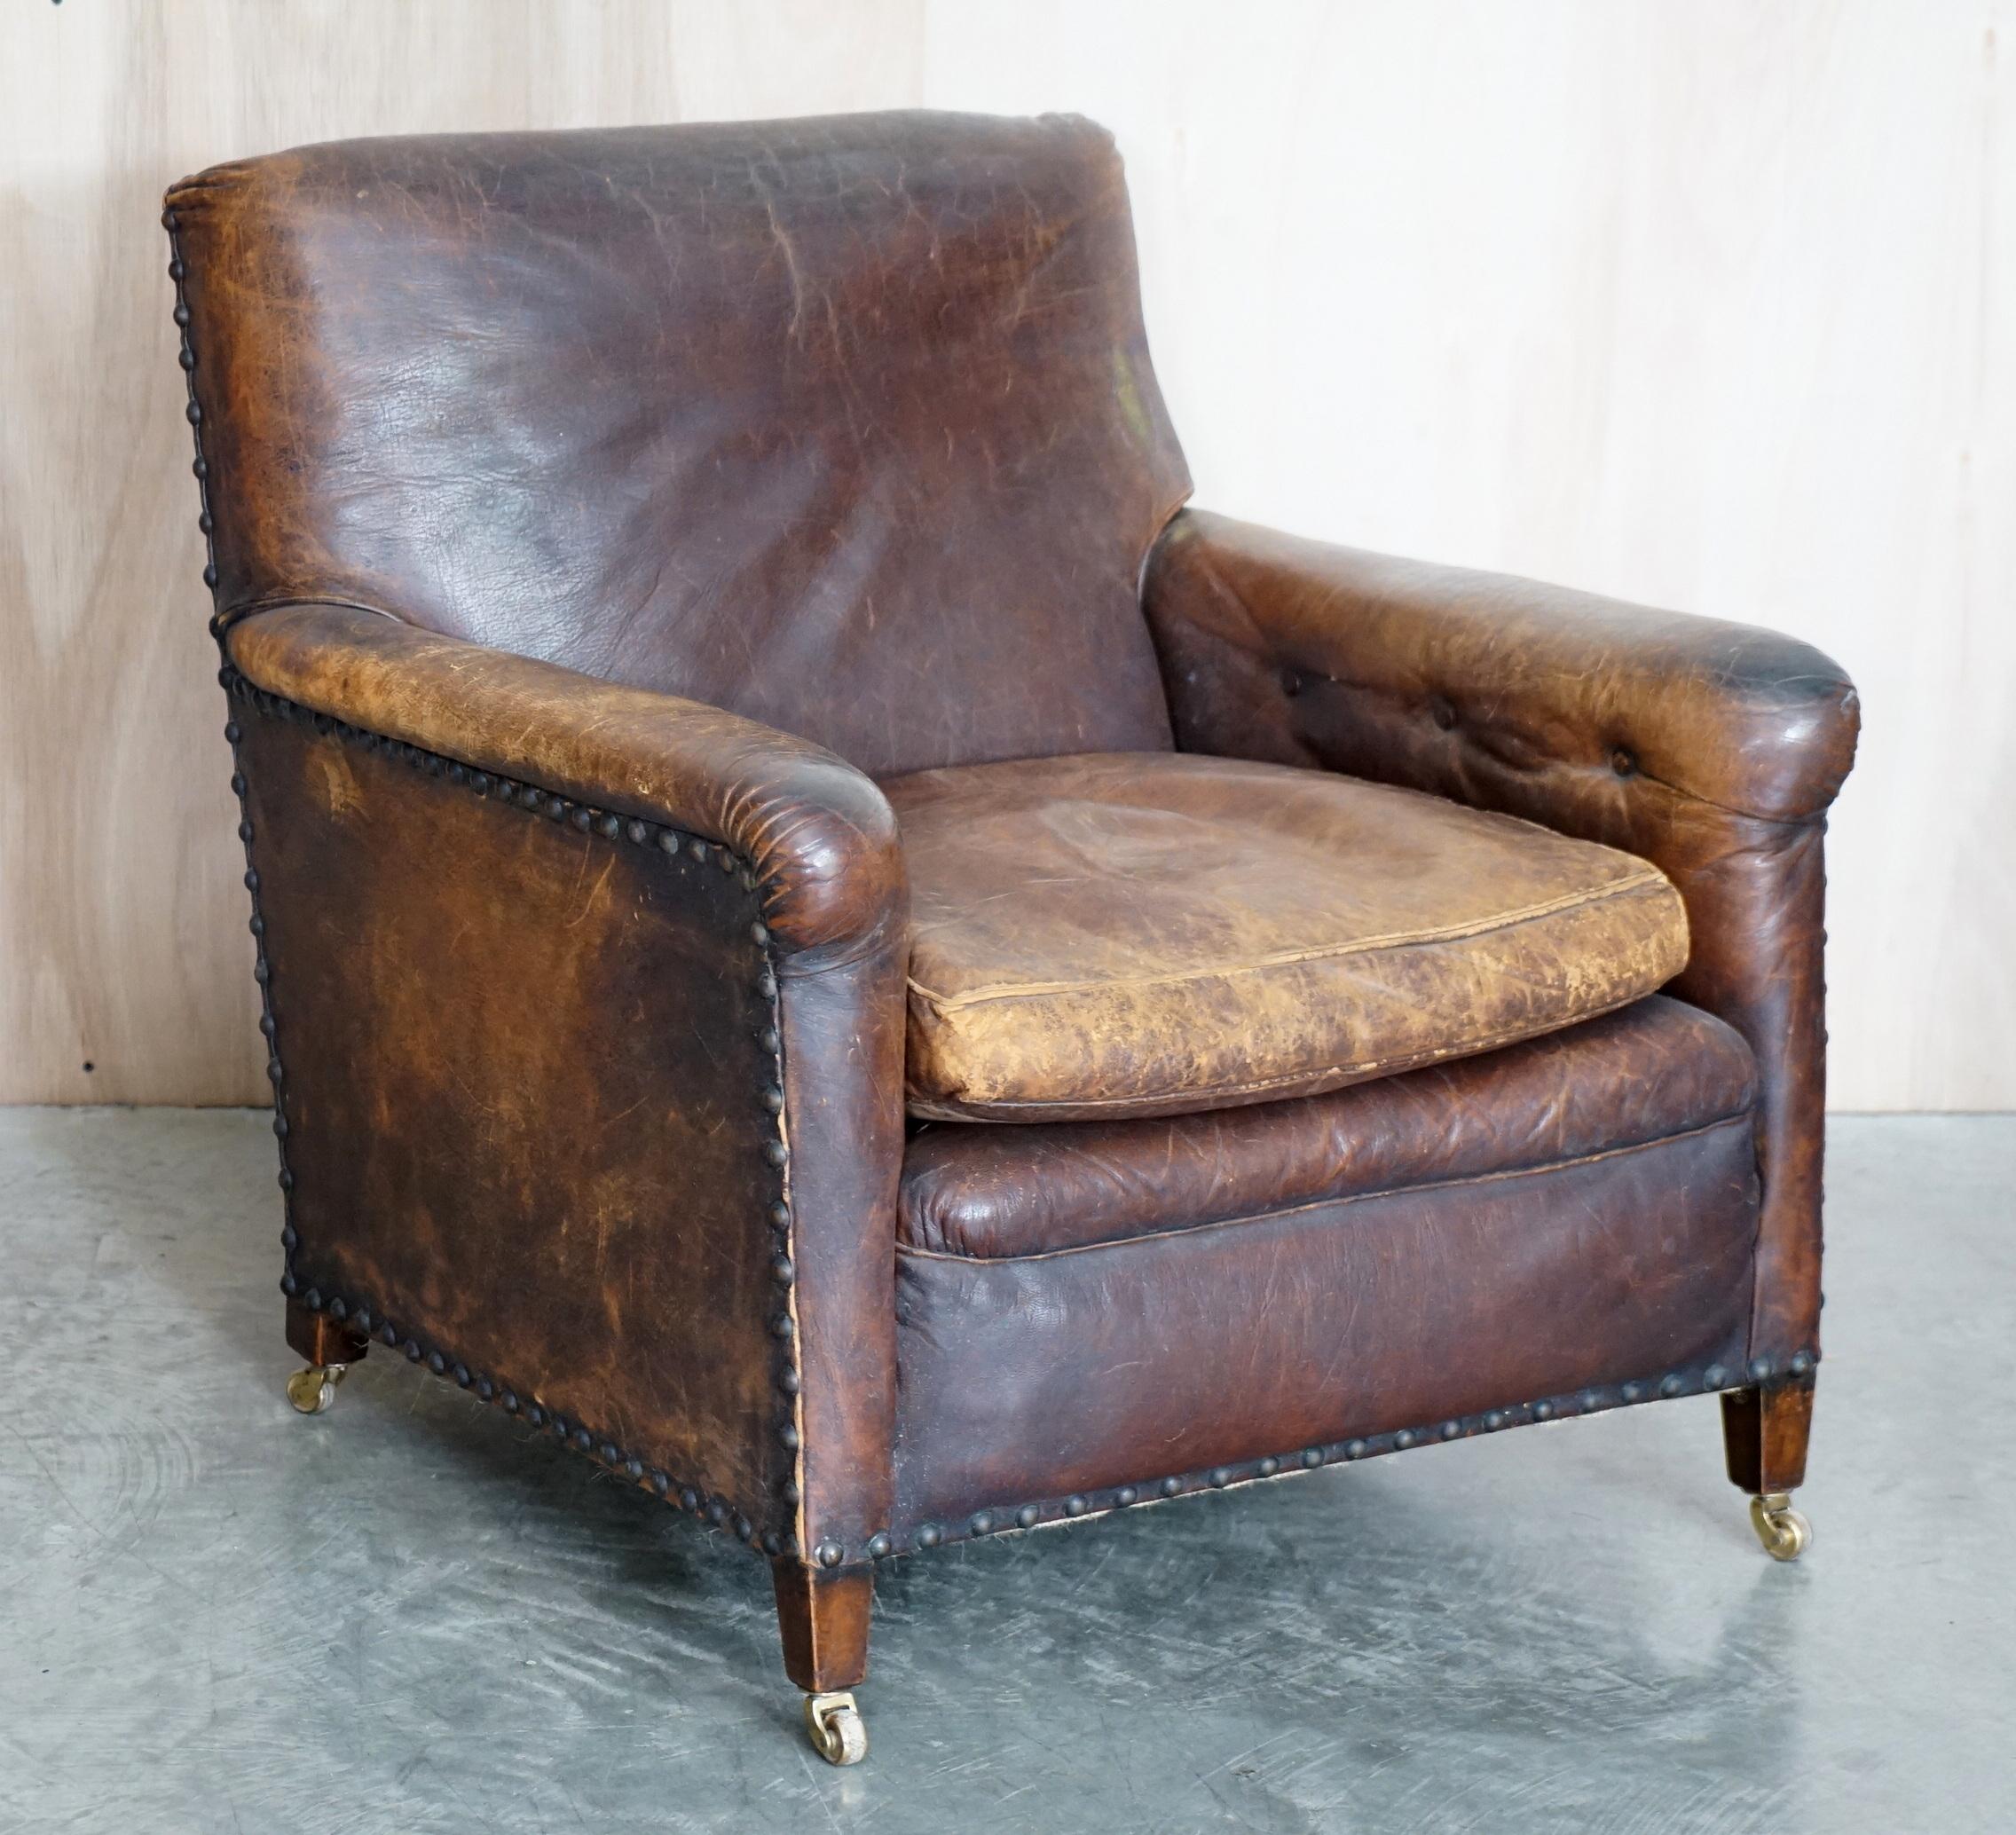 We are delighted to offer for sale this super comfortable pair of original leather, Victorian club armchairs with coil sprung bases, feather filled cushions and Thomas Chippendale style floating buttons on the arms.

These are a very well made and